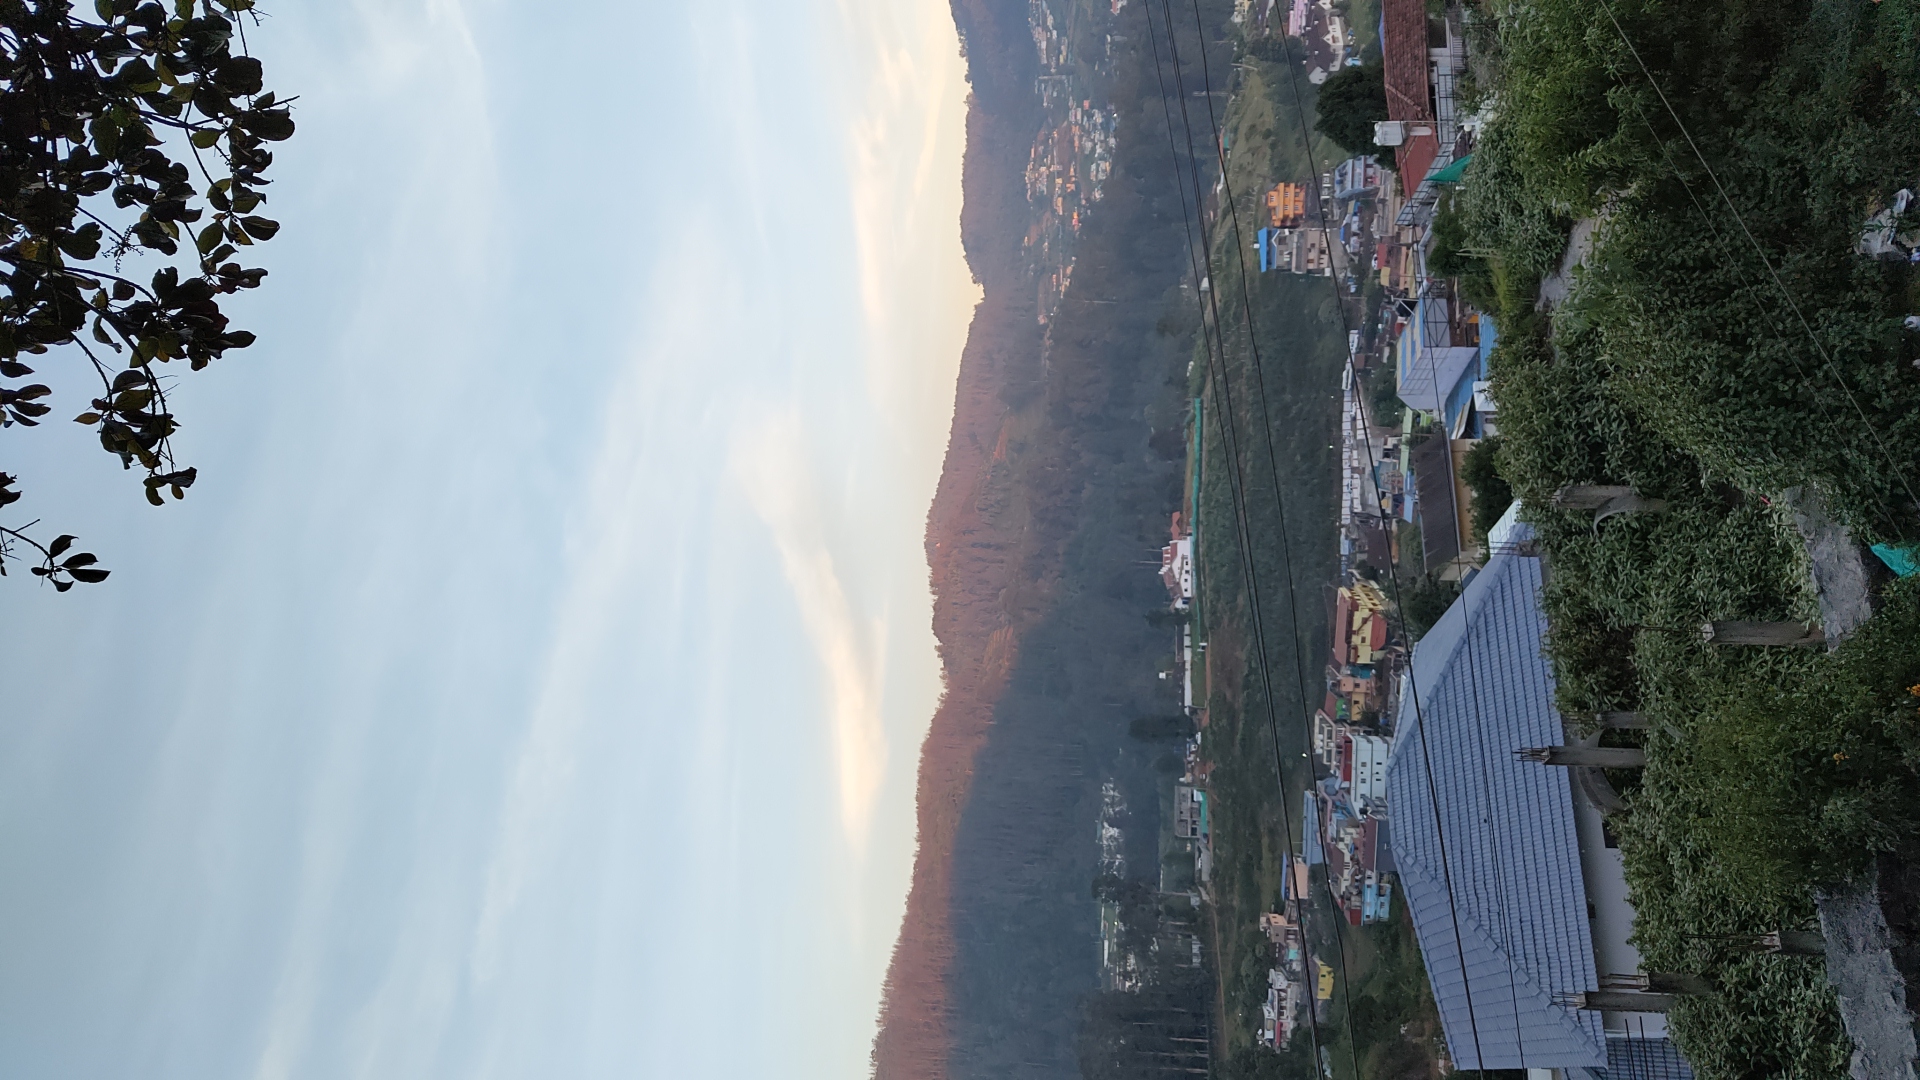 Ooty is a must-visit place